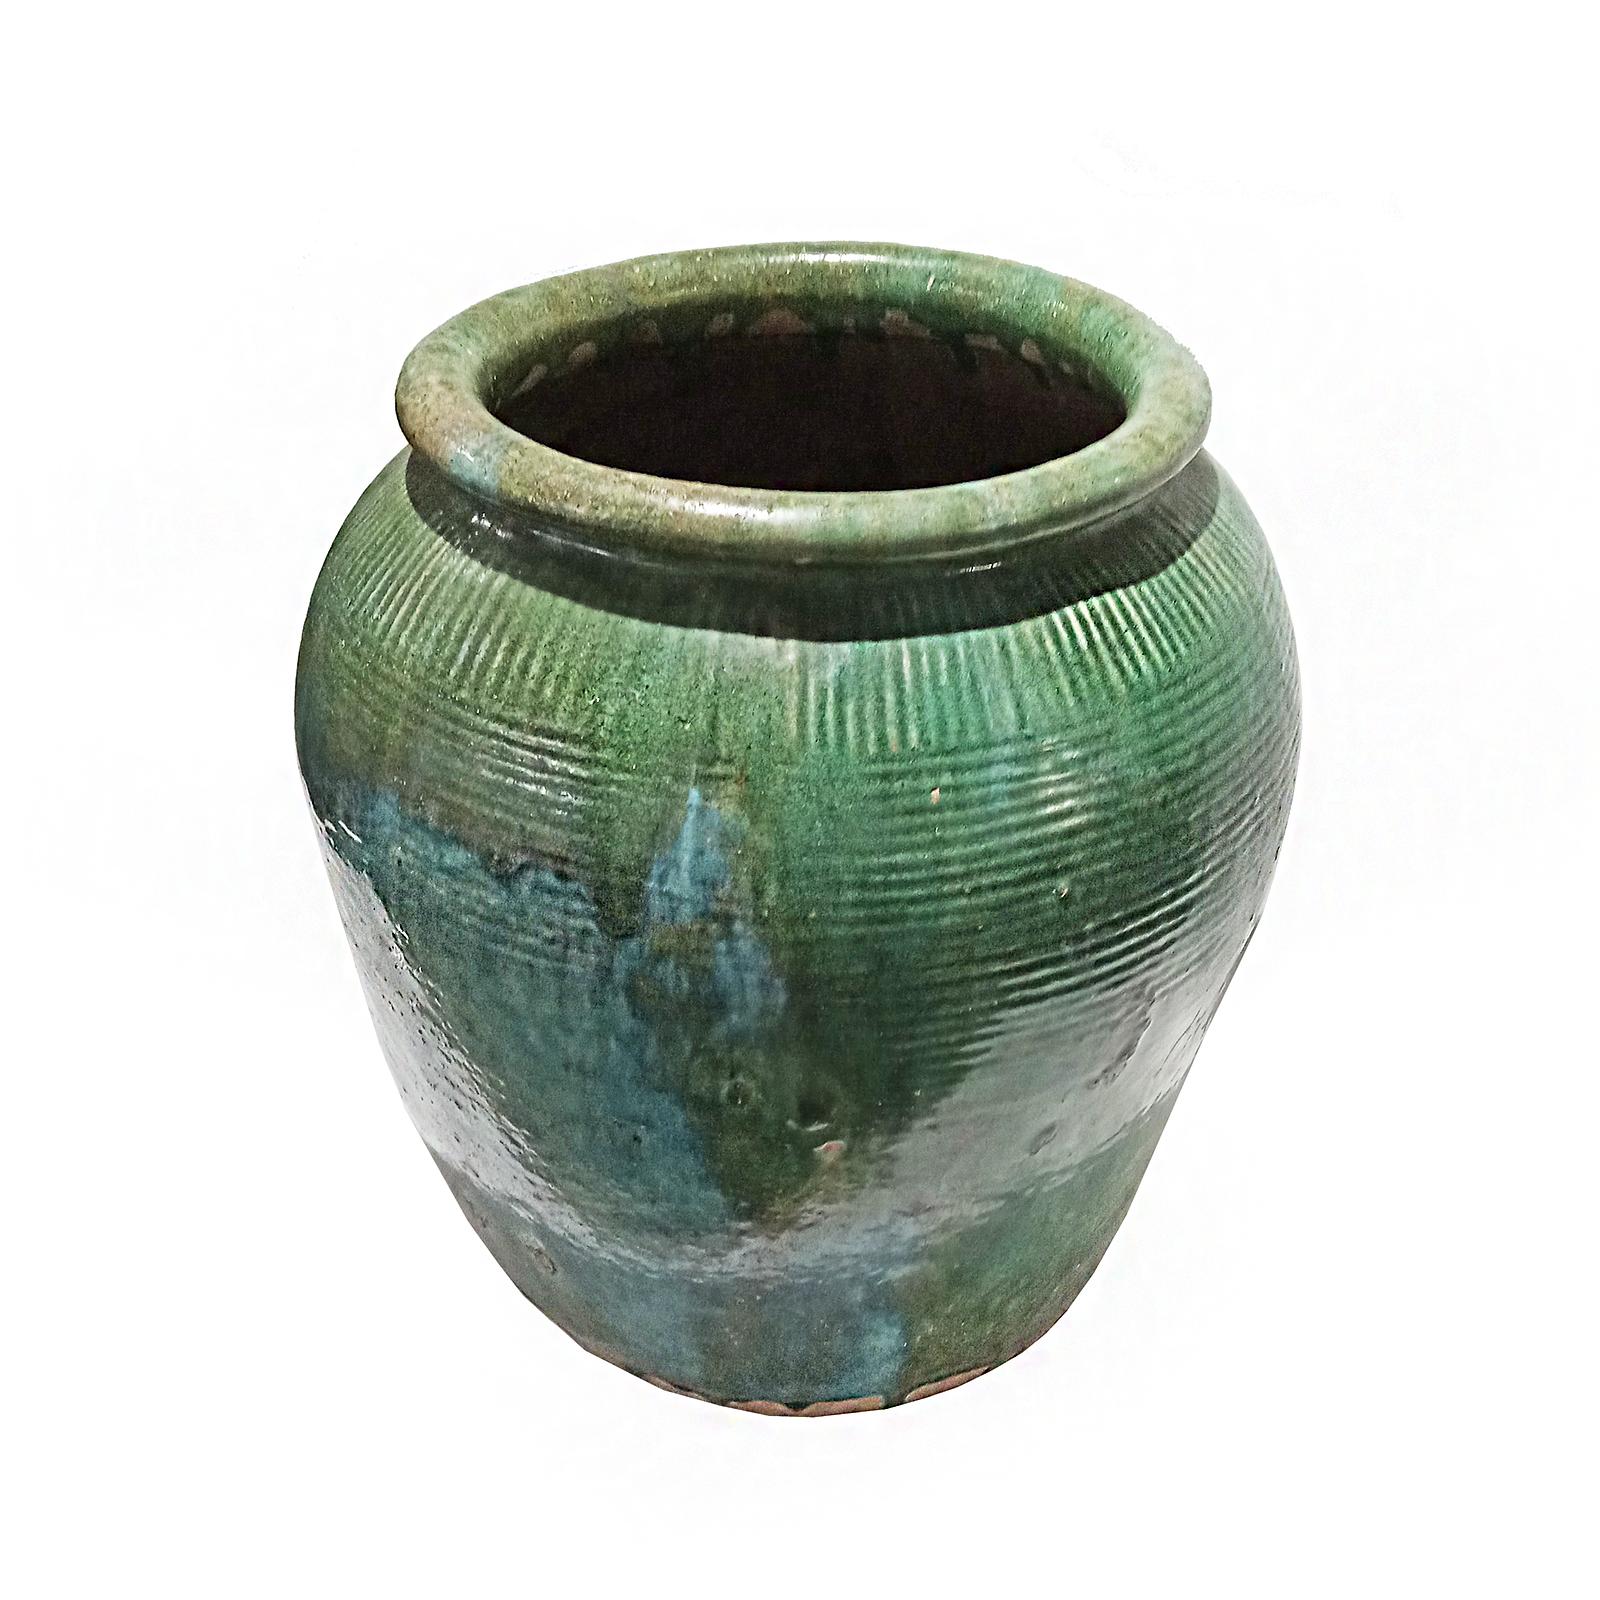 Ceramic Balinese Terracotta Vase / Jar / Urn with Green Glaze, Contemporary For Sale